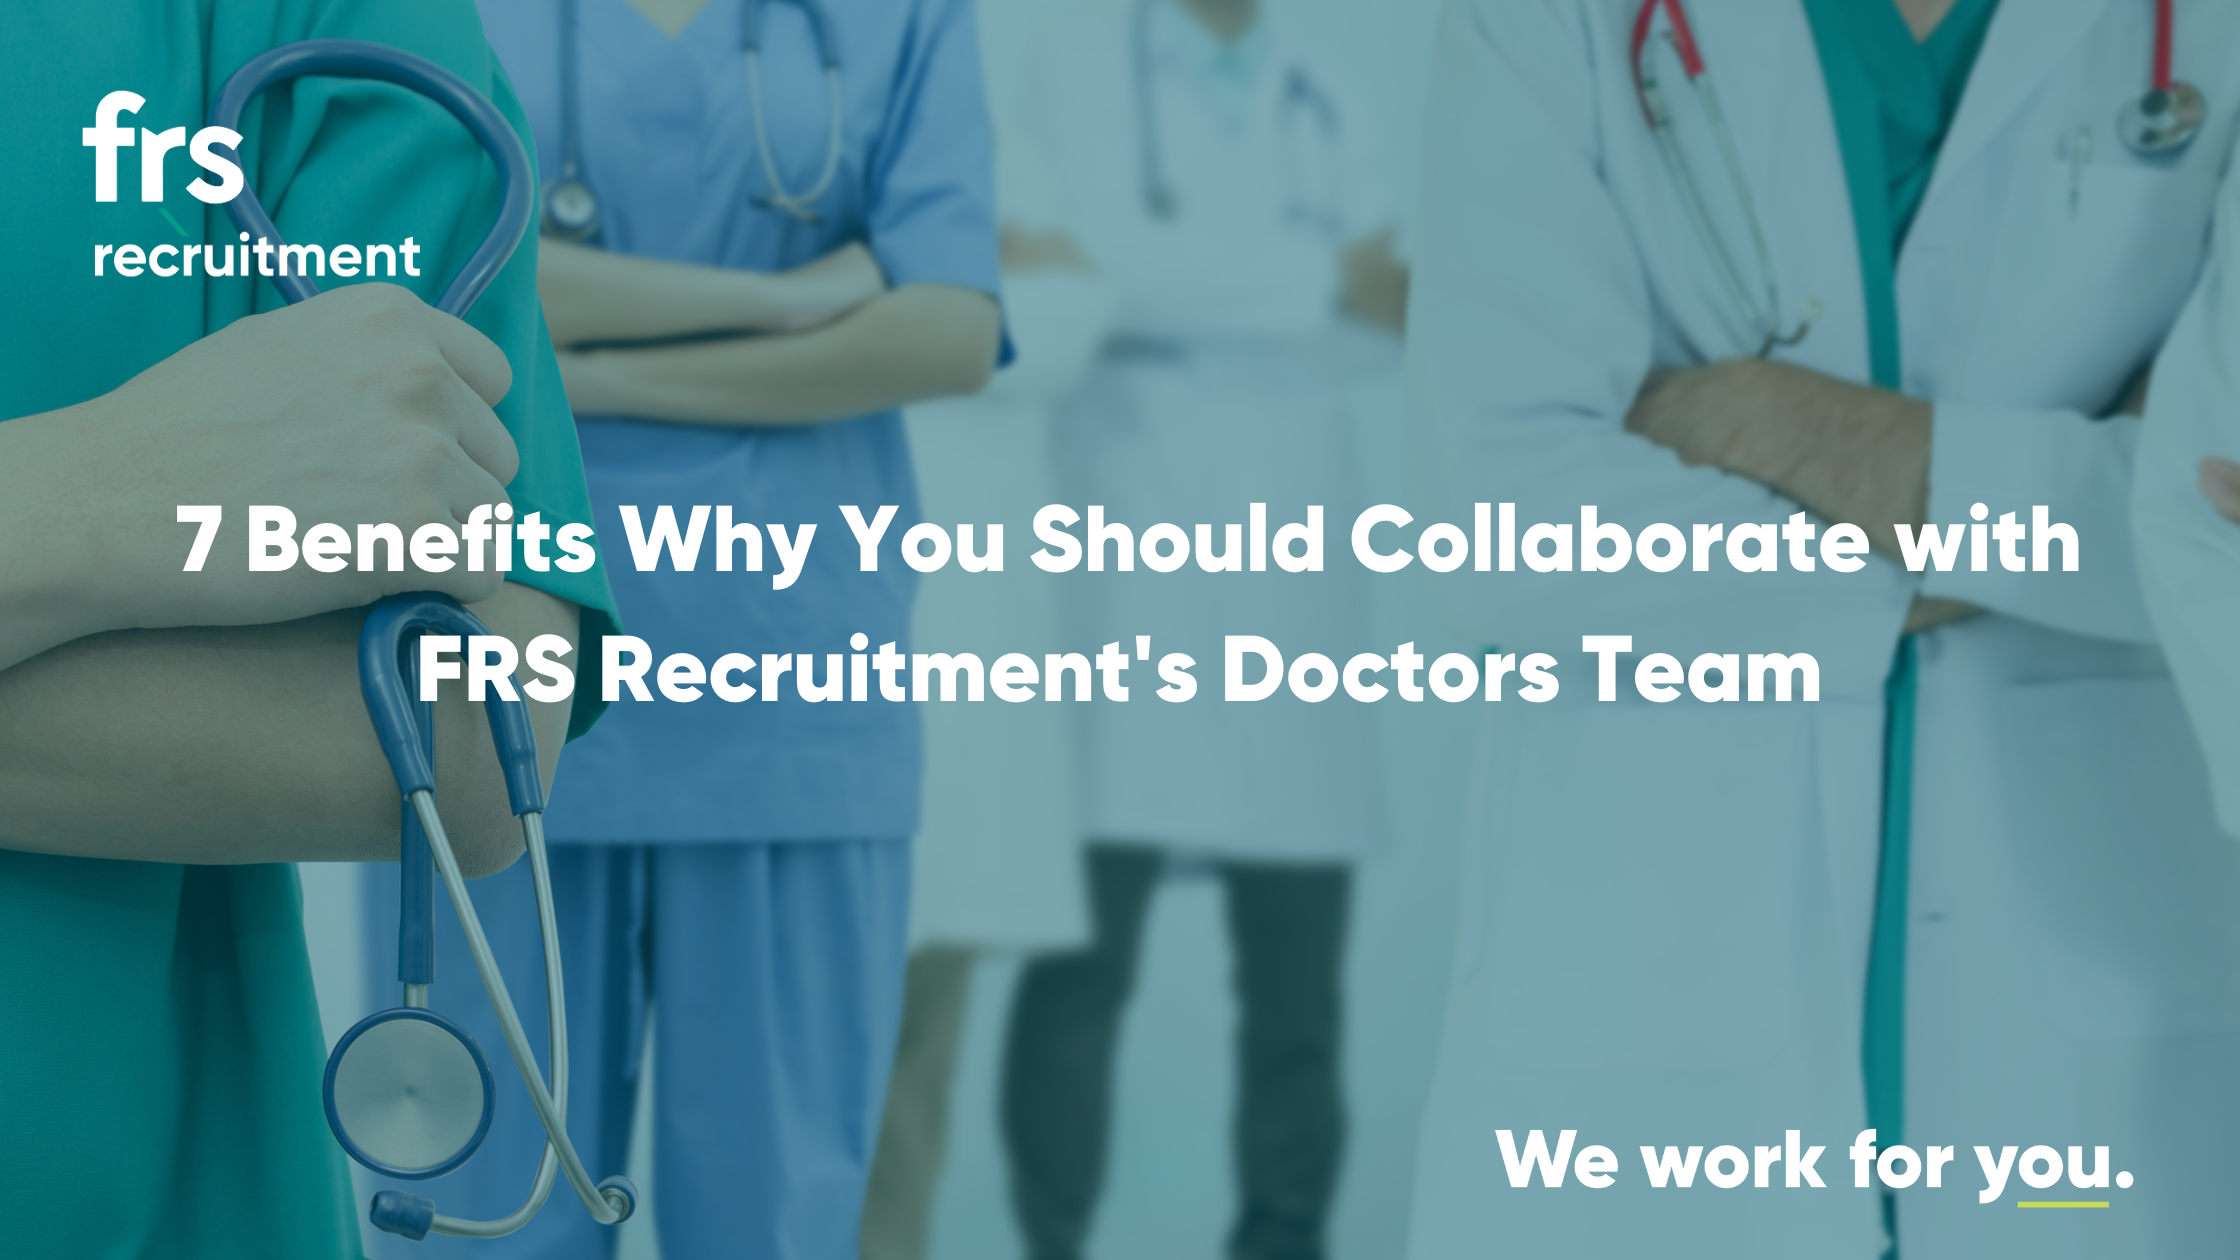 7 Benefits Why You Should Collaborate with FRS Recruitment's Doctors Team